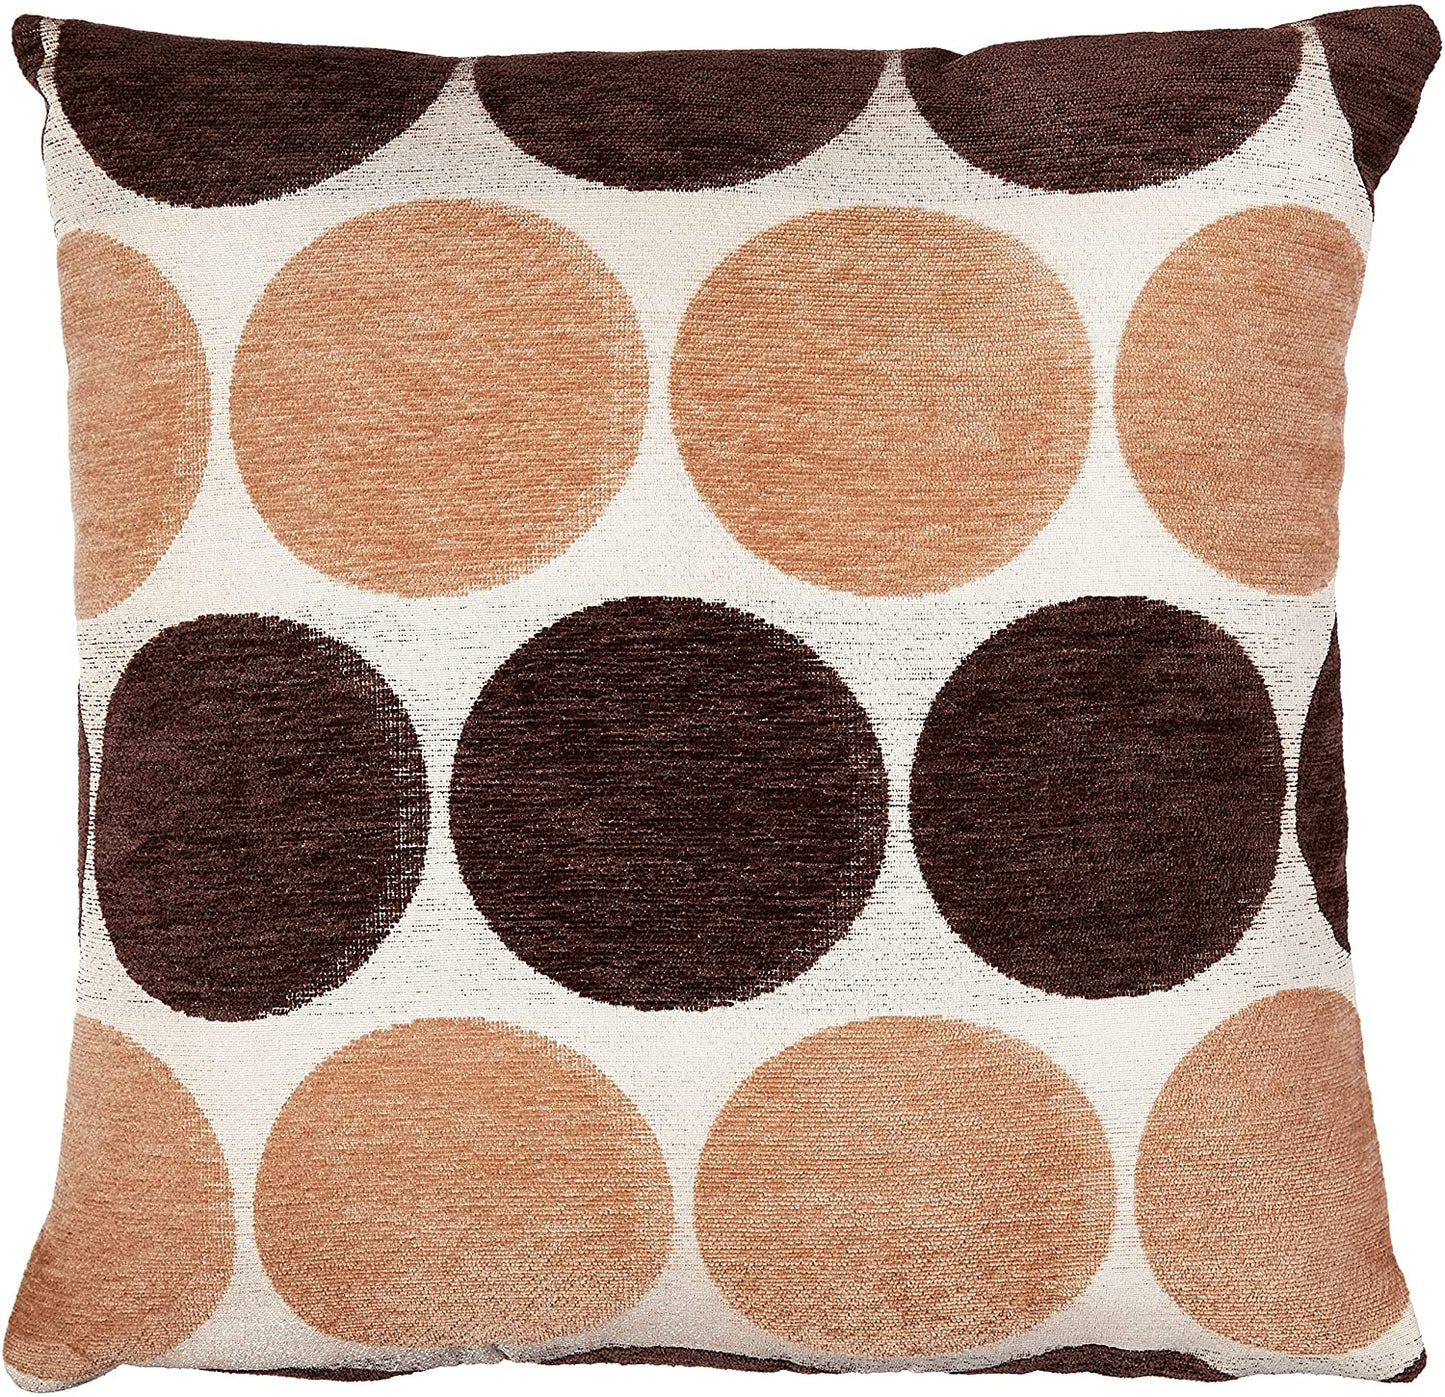 Chenille Circle Spots Pattern Decorative Accent Throw Pillow